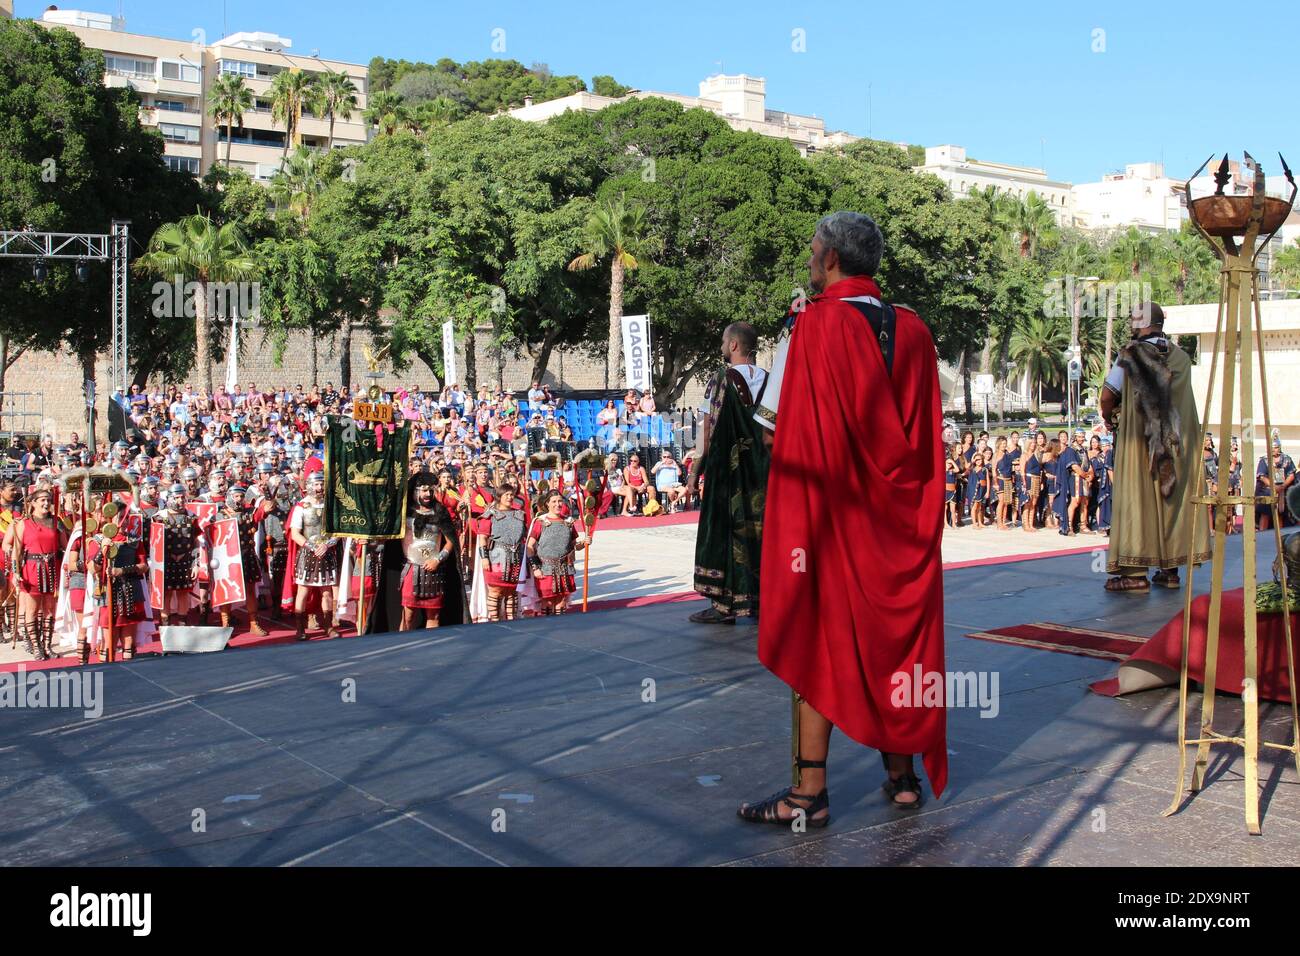 An annual festival in Cartagena, Spain is the Cartaginians and Romans. Here the General of the Roman forces rallies his troops for the battle to come. Stock Photo